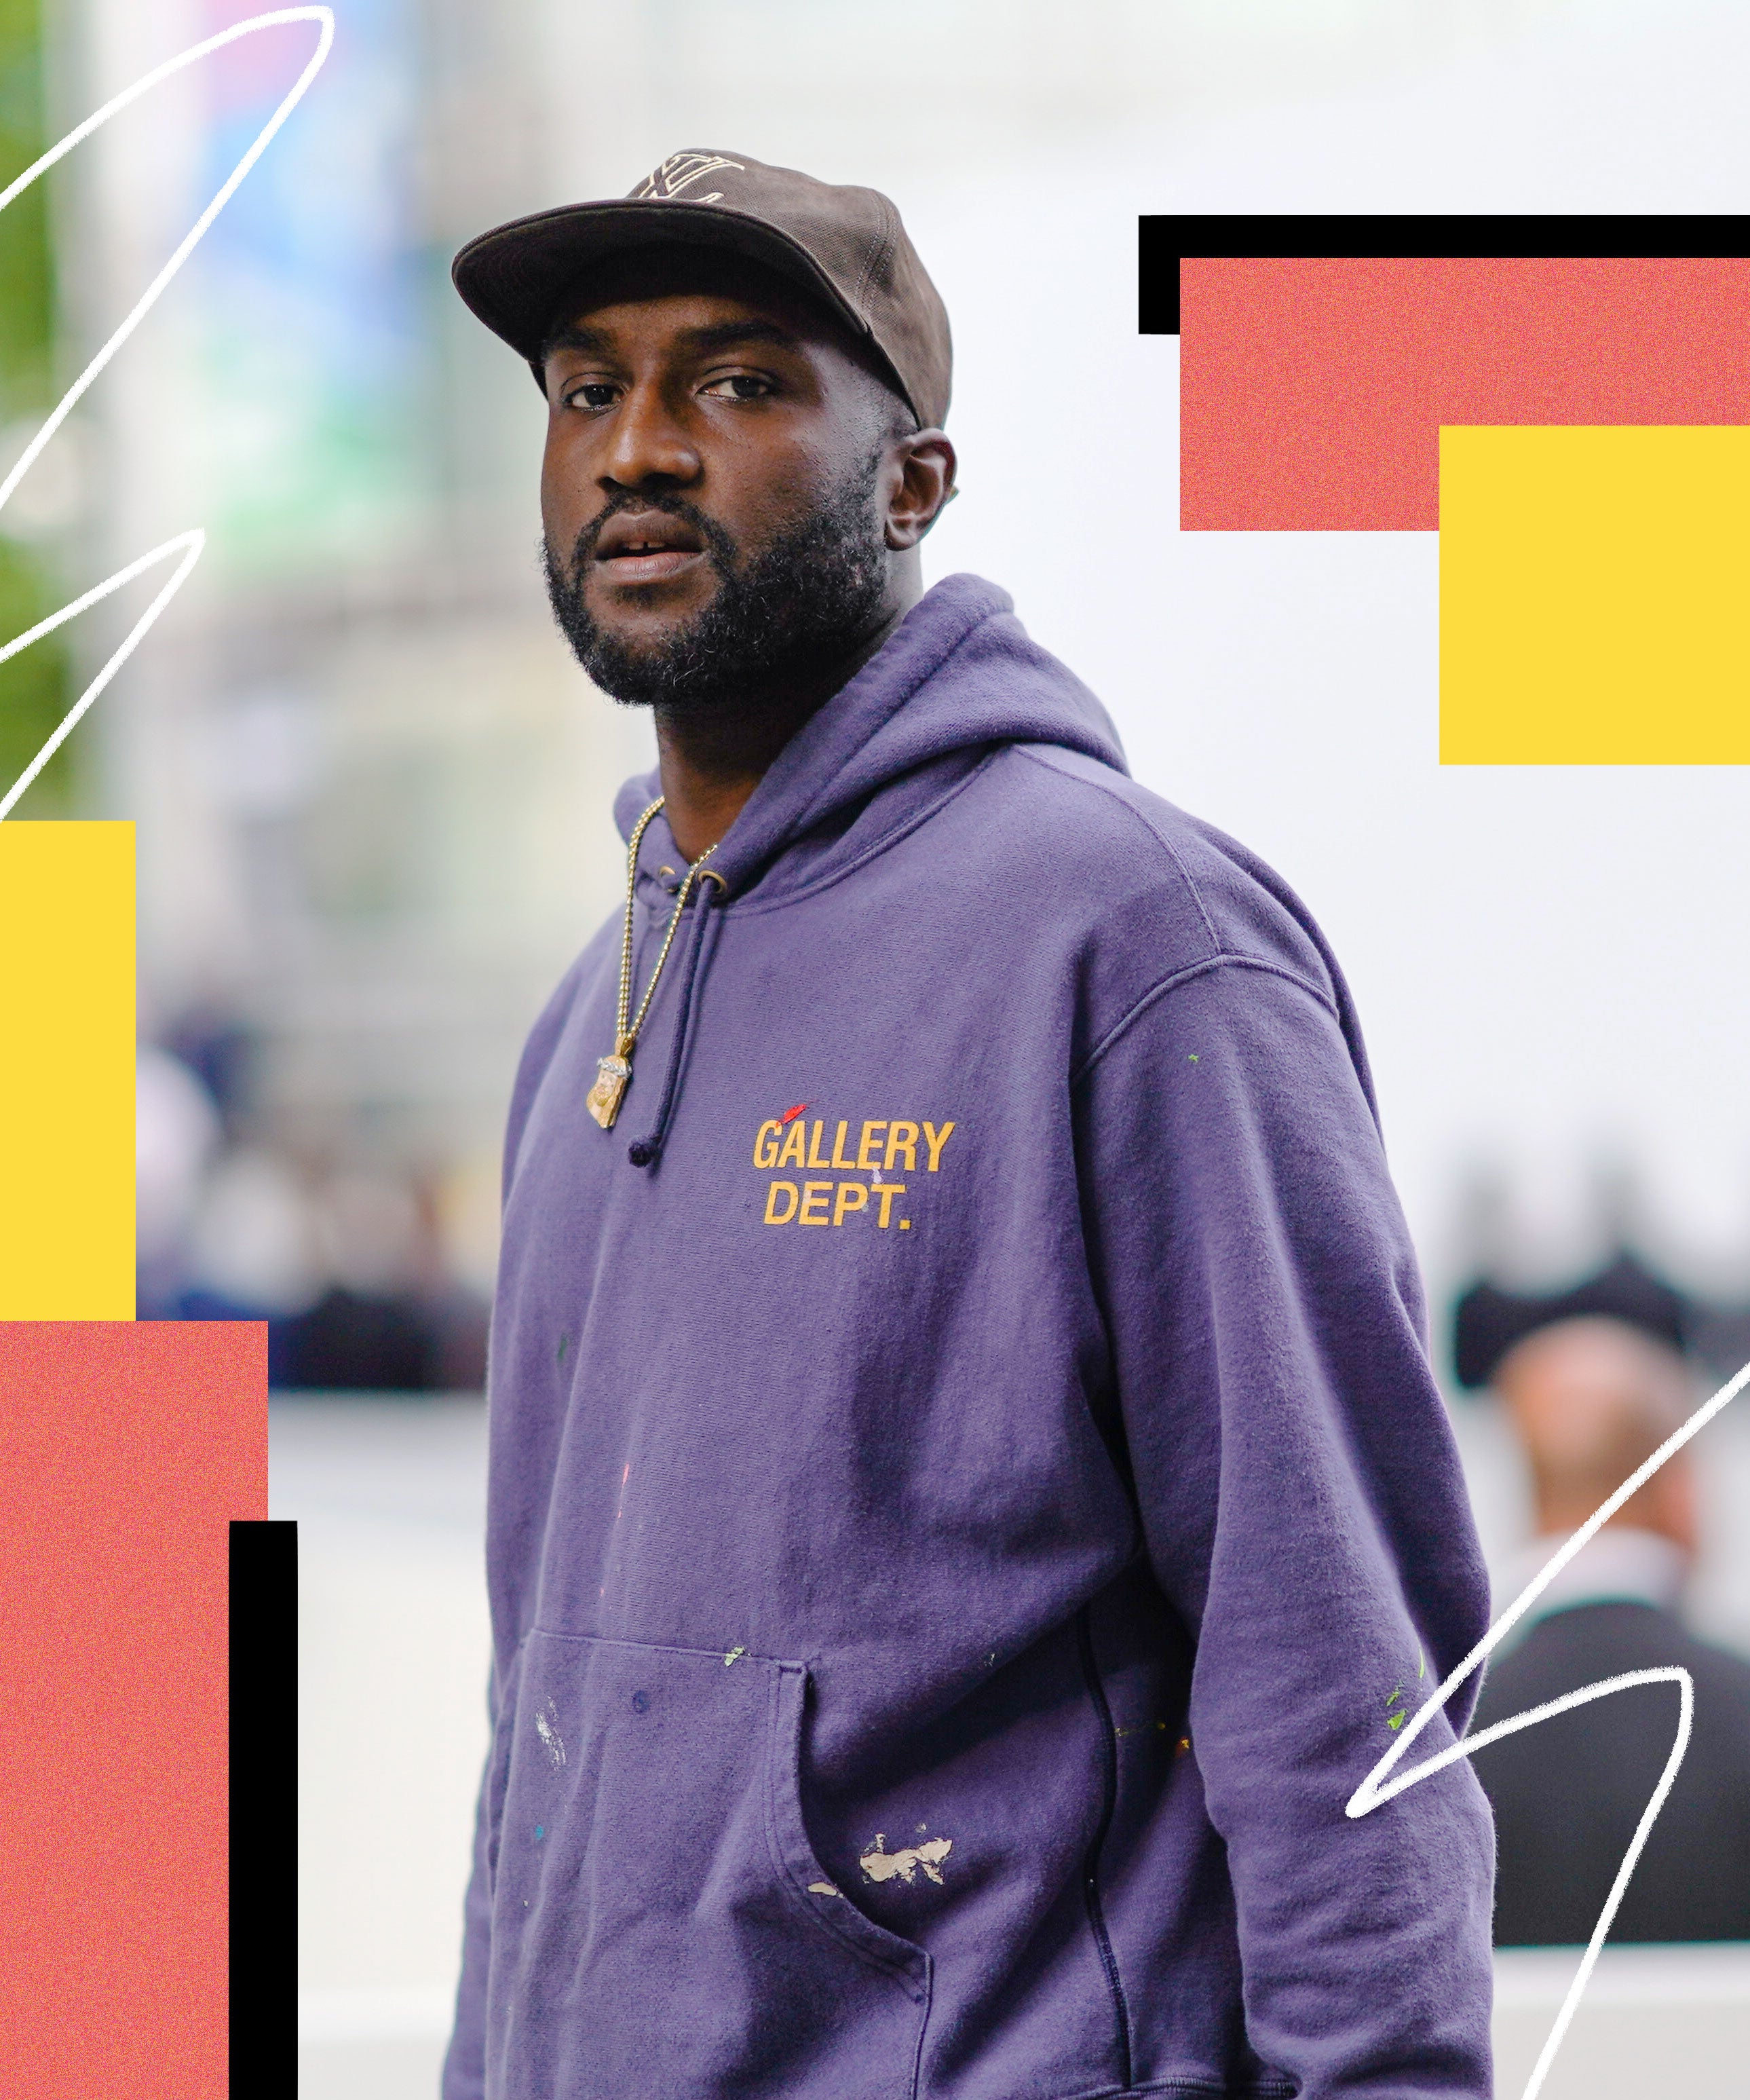 Virgil Abloh and Jacob & Co. Collab on Office Supplies - PAPER Magazine